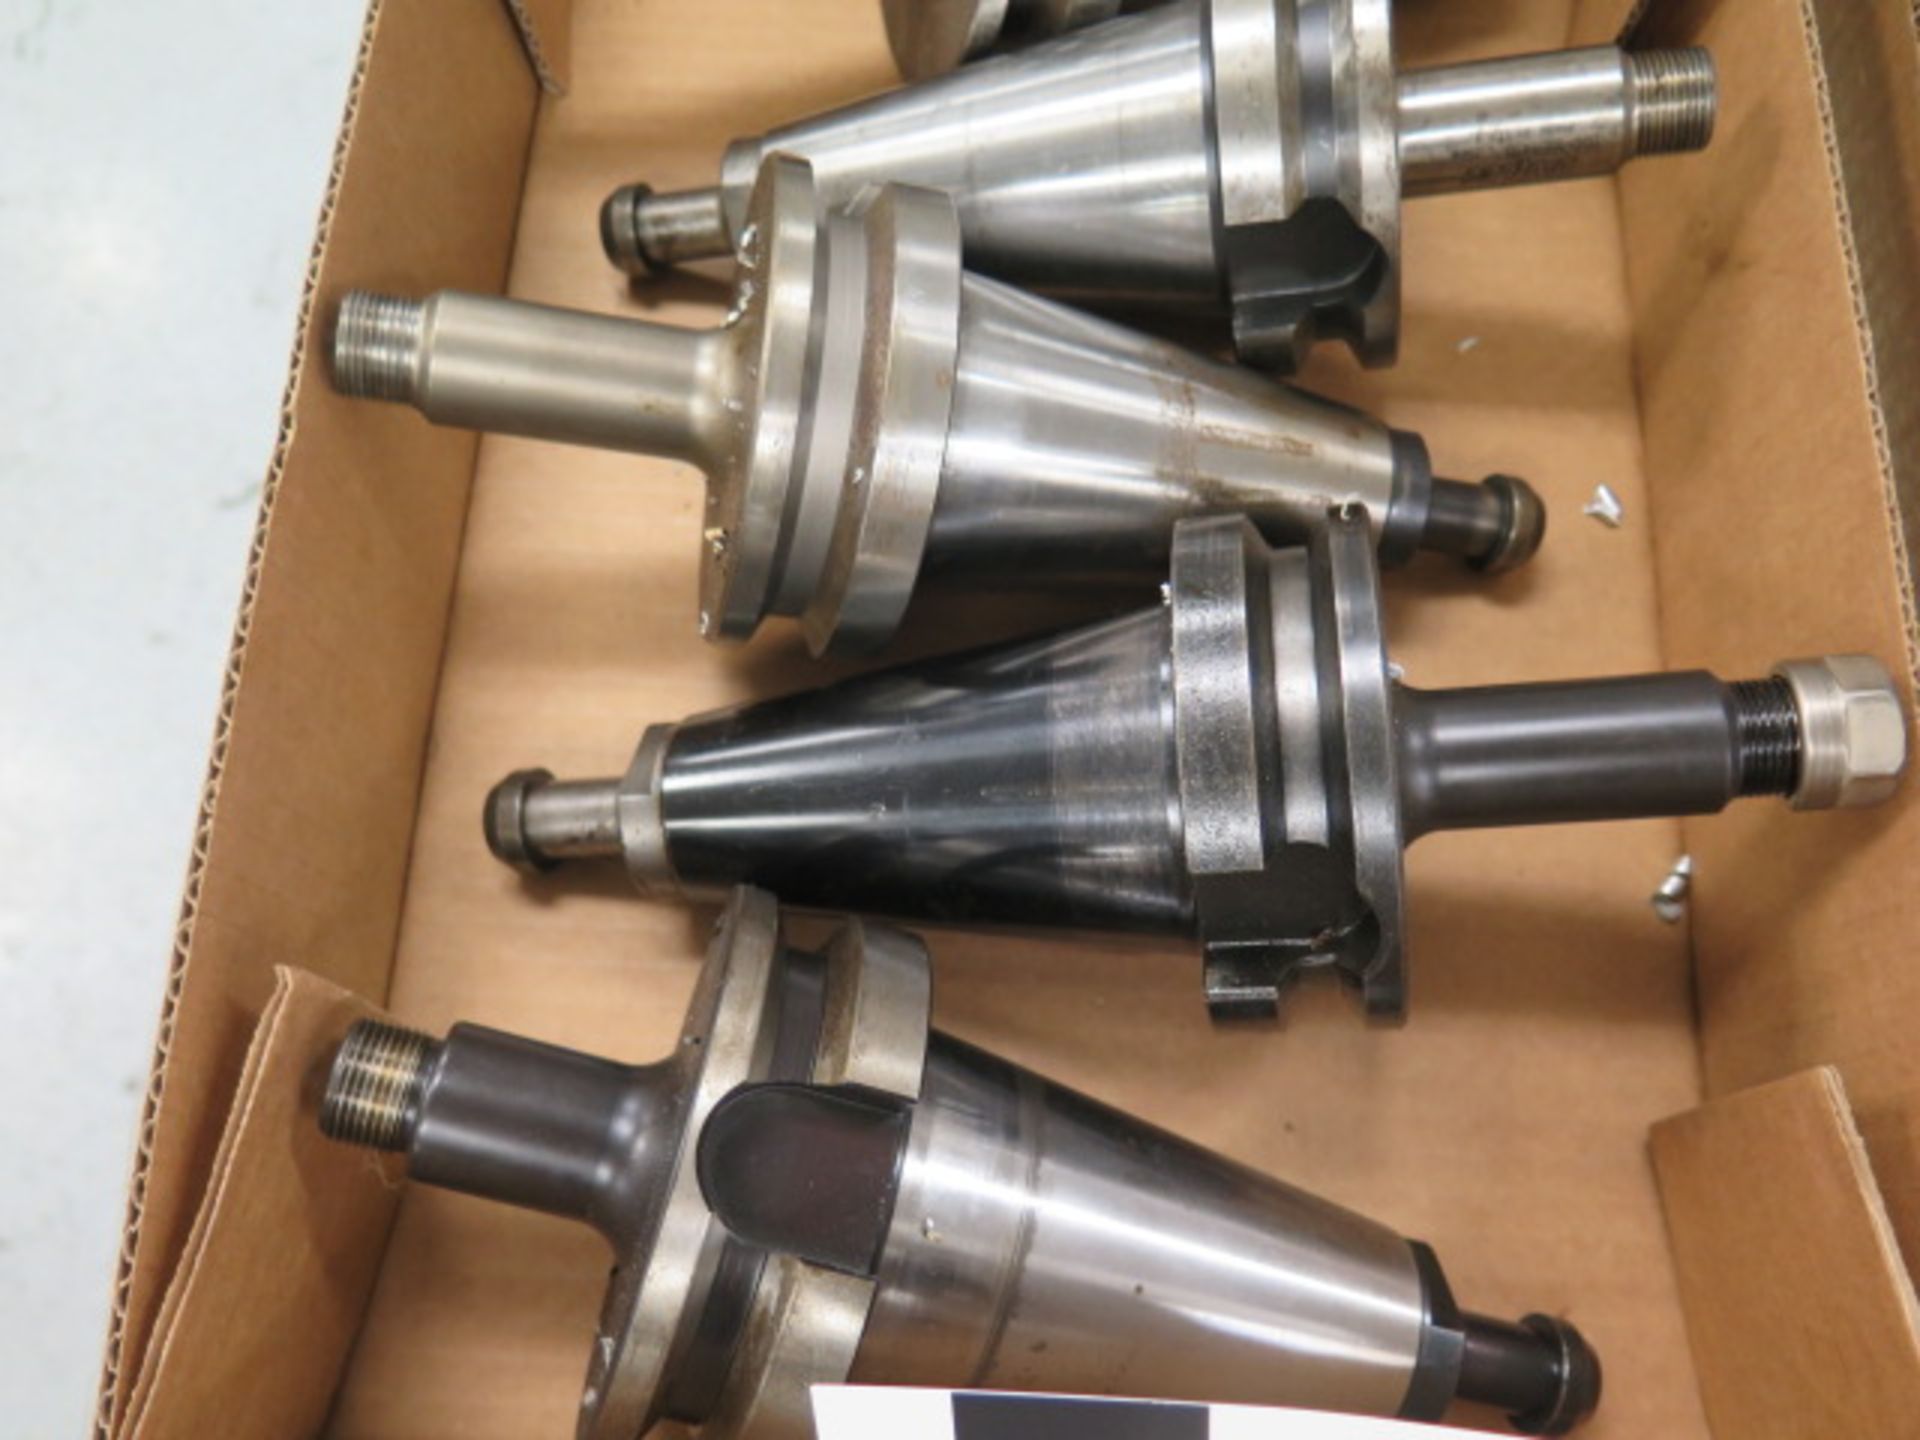 BT-50 Taper ER16 Collet chucks (5) (SOLD AS-IS - NO WARRANTY) (Located @ 2229 Ringwood Ave. San Jose - Image 4 of 6